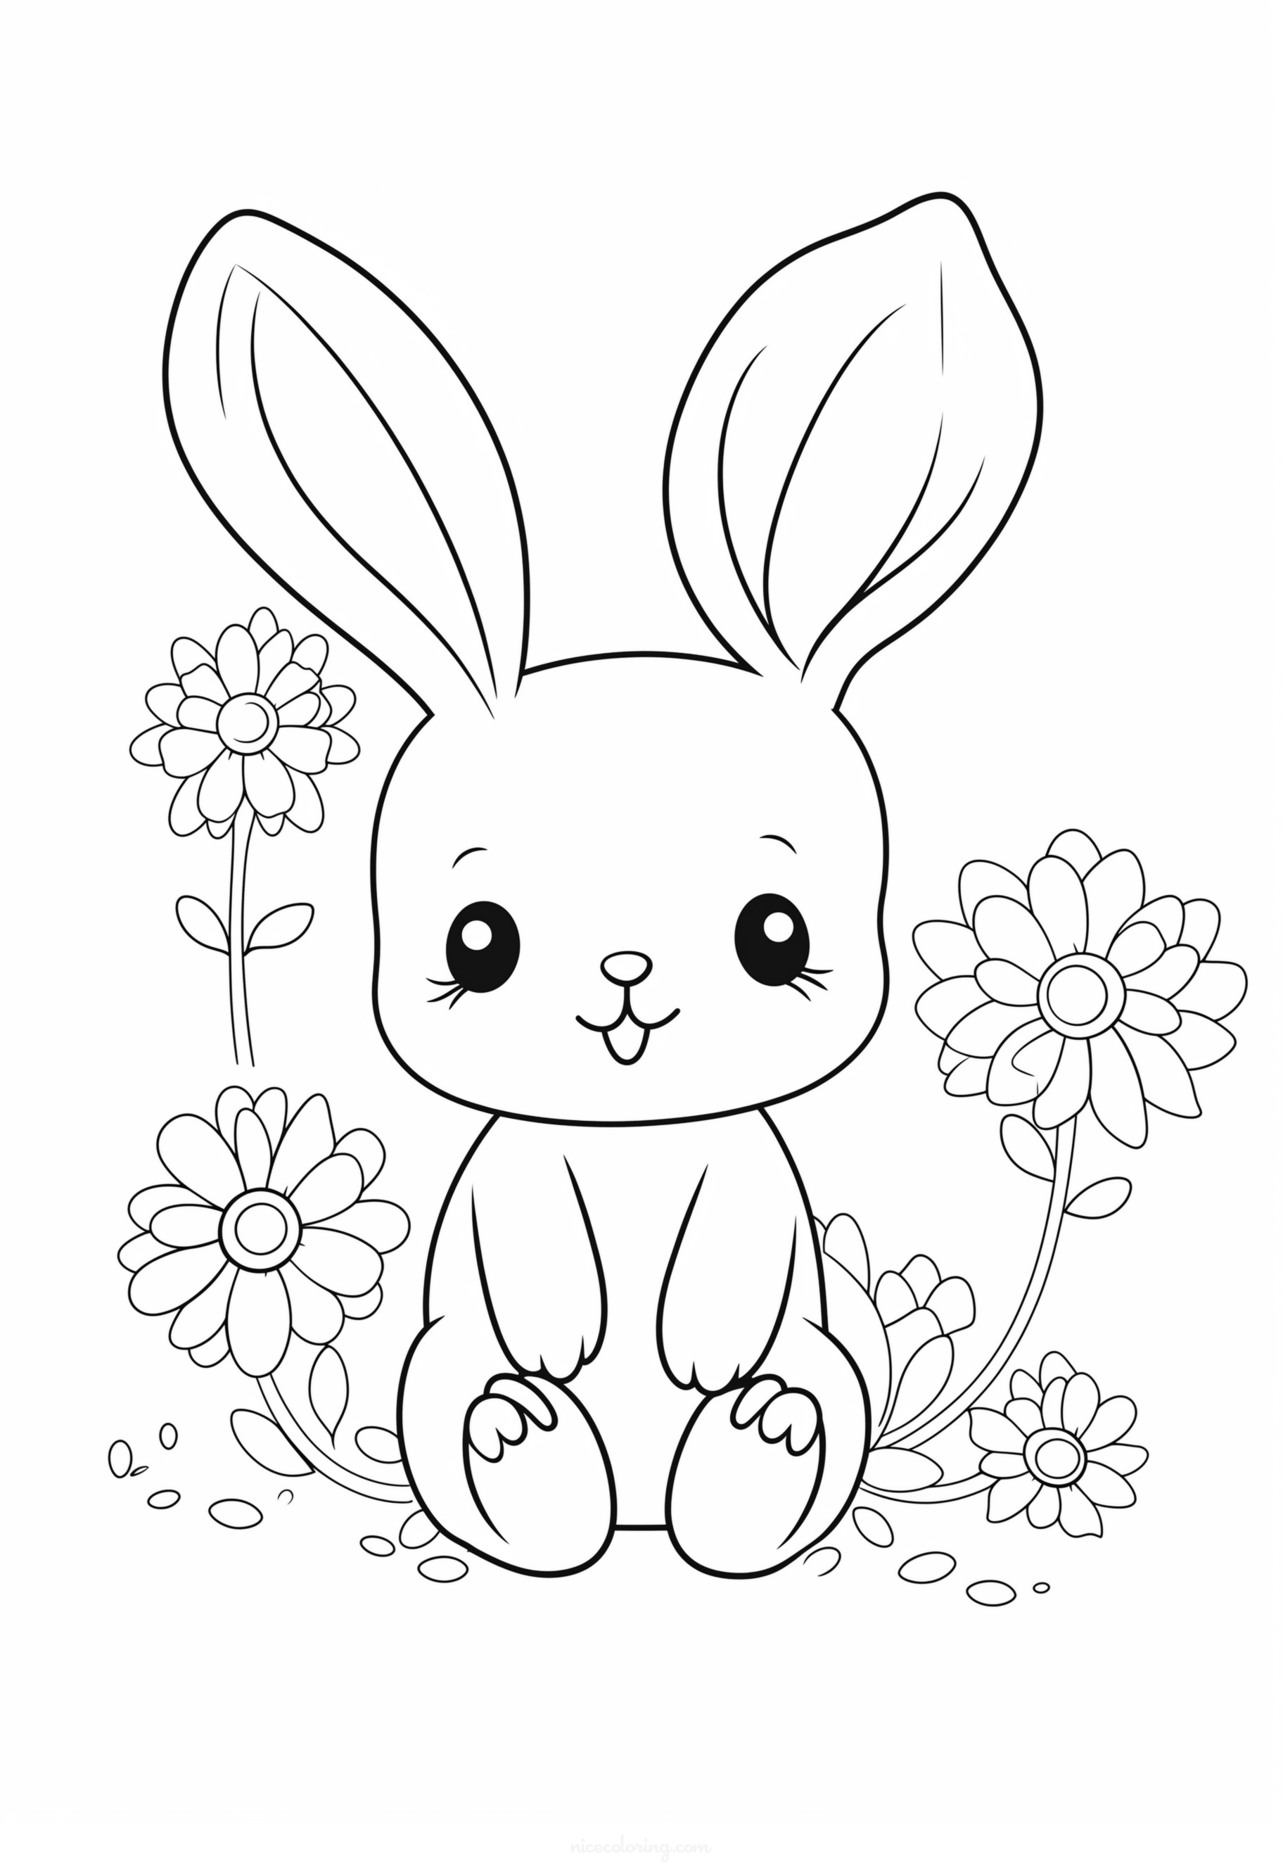 Rabbit surrounded by flowers coloring page